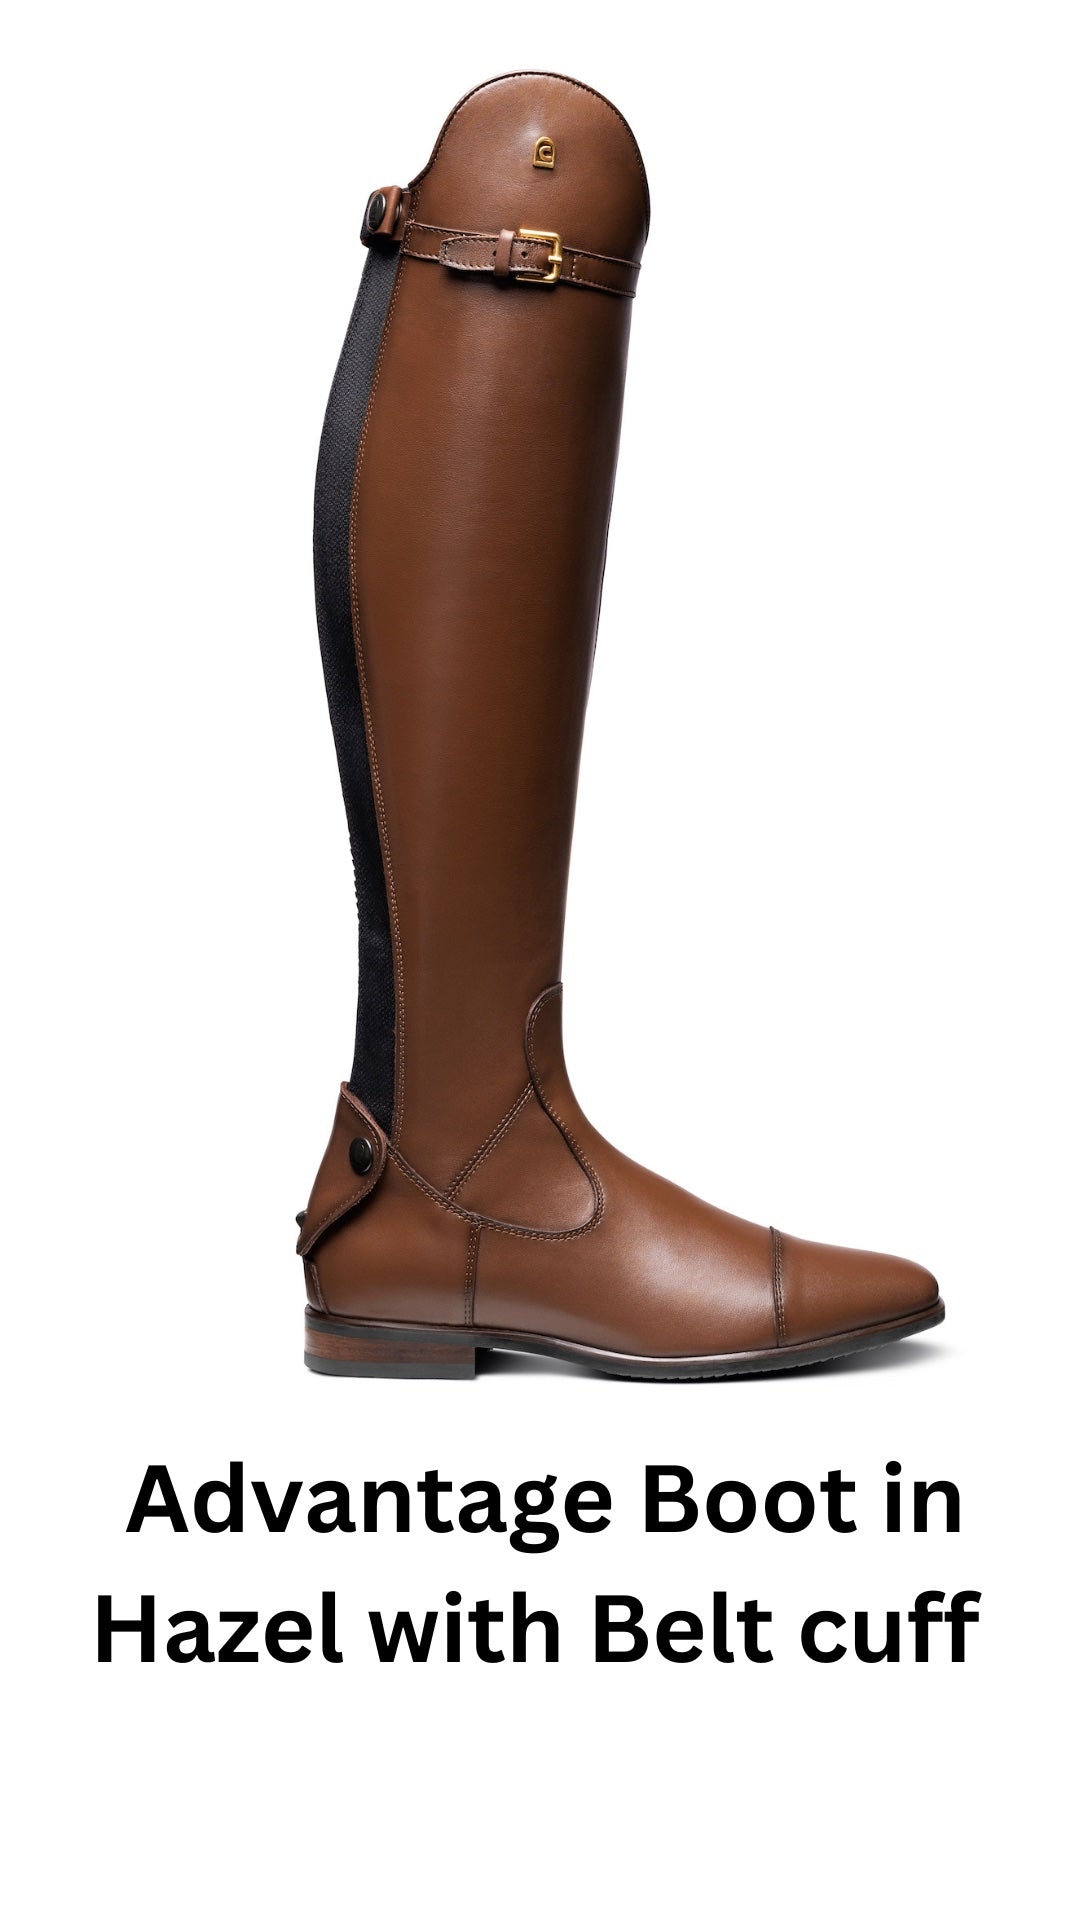 Cavallo Advantage Field Jumping Boots (With Laces)